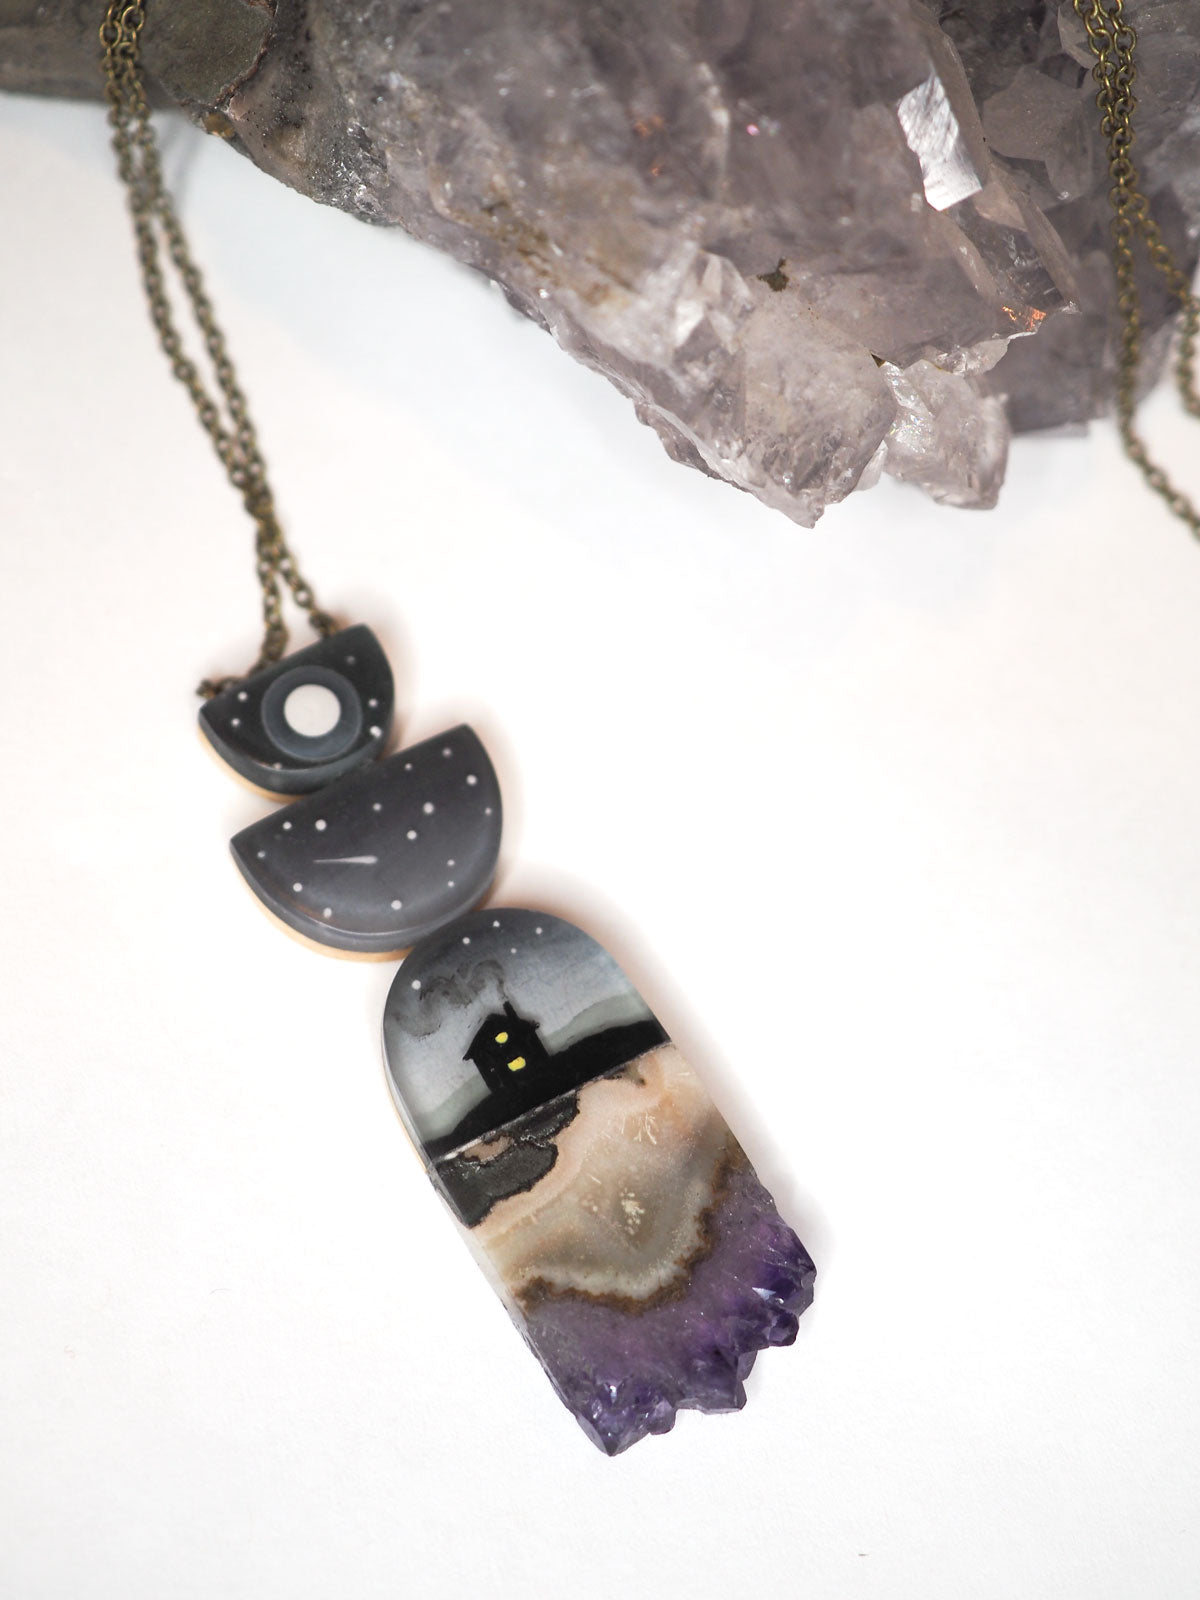 Hand-painted resin and amethyst slice necklace featuring 2 half circles on top of a silhouette of a house at night under a full moon and shooting stars